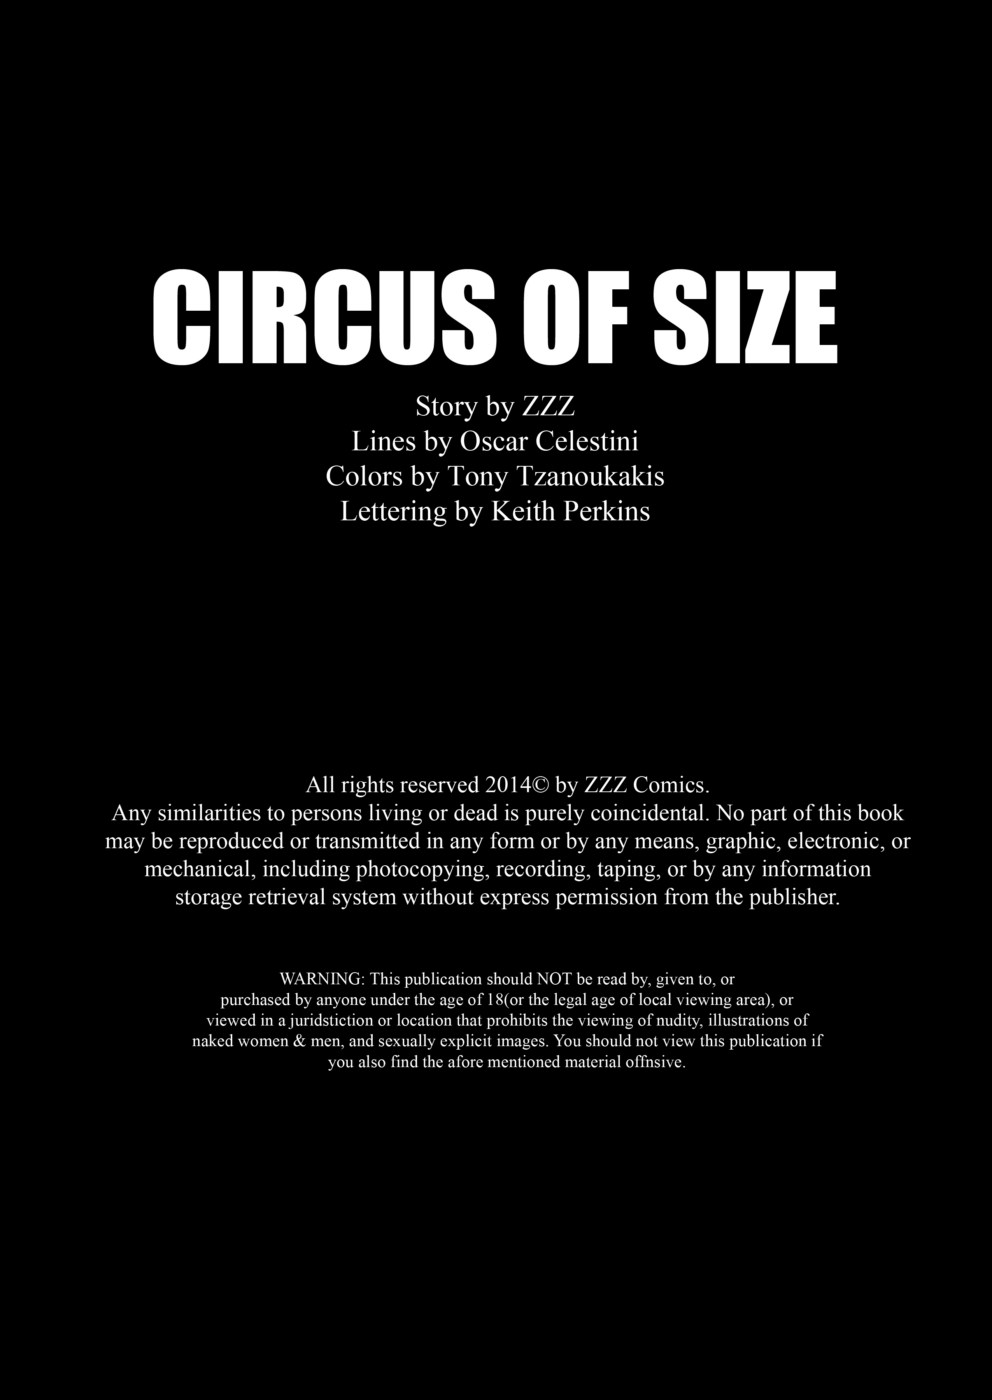 Circus of Size 1- ZZZ